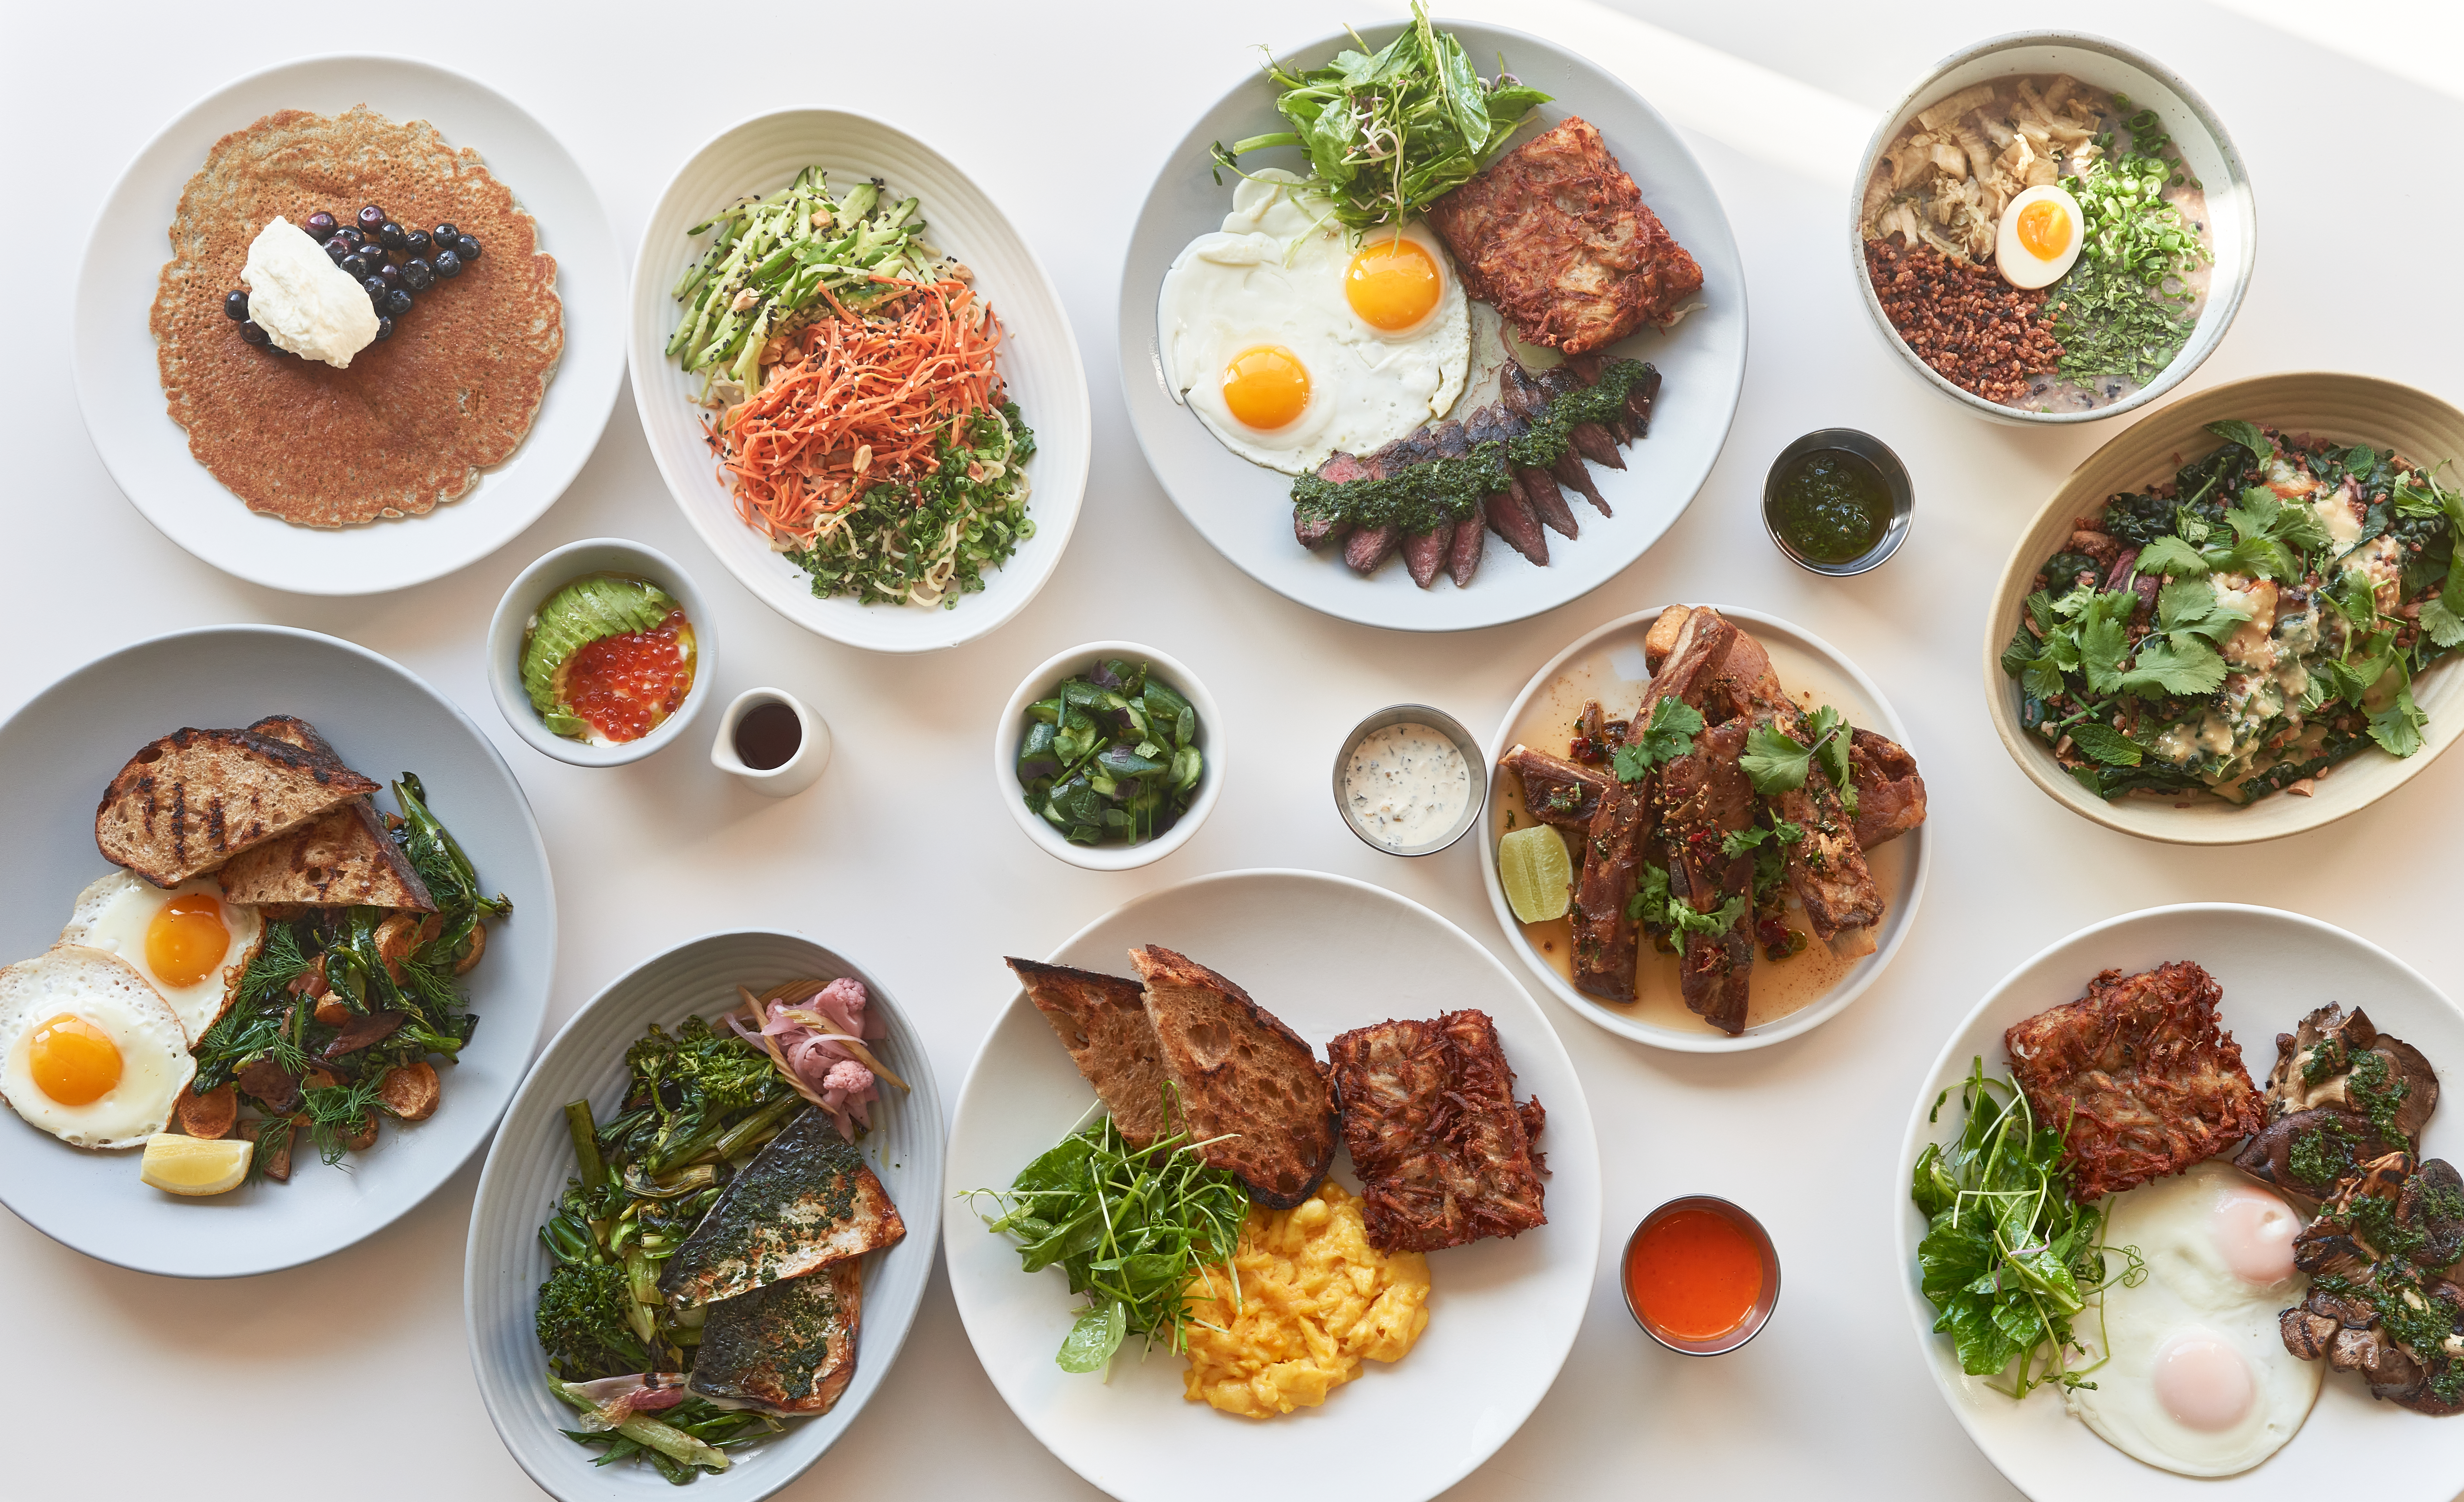 A collection of brunch dishes like pancakes, and steak and eggs at Yang’s Kitchen.